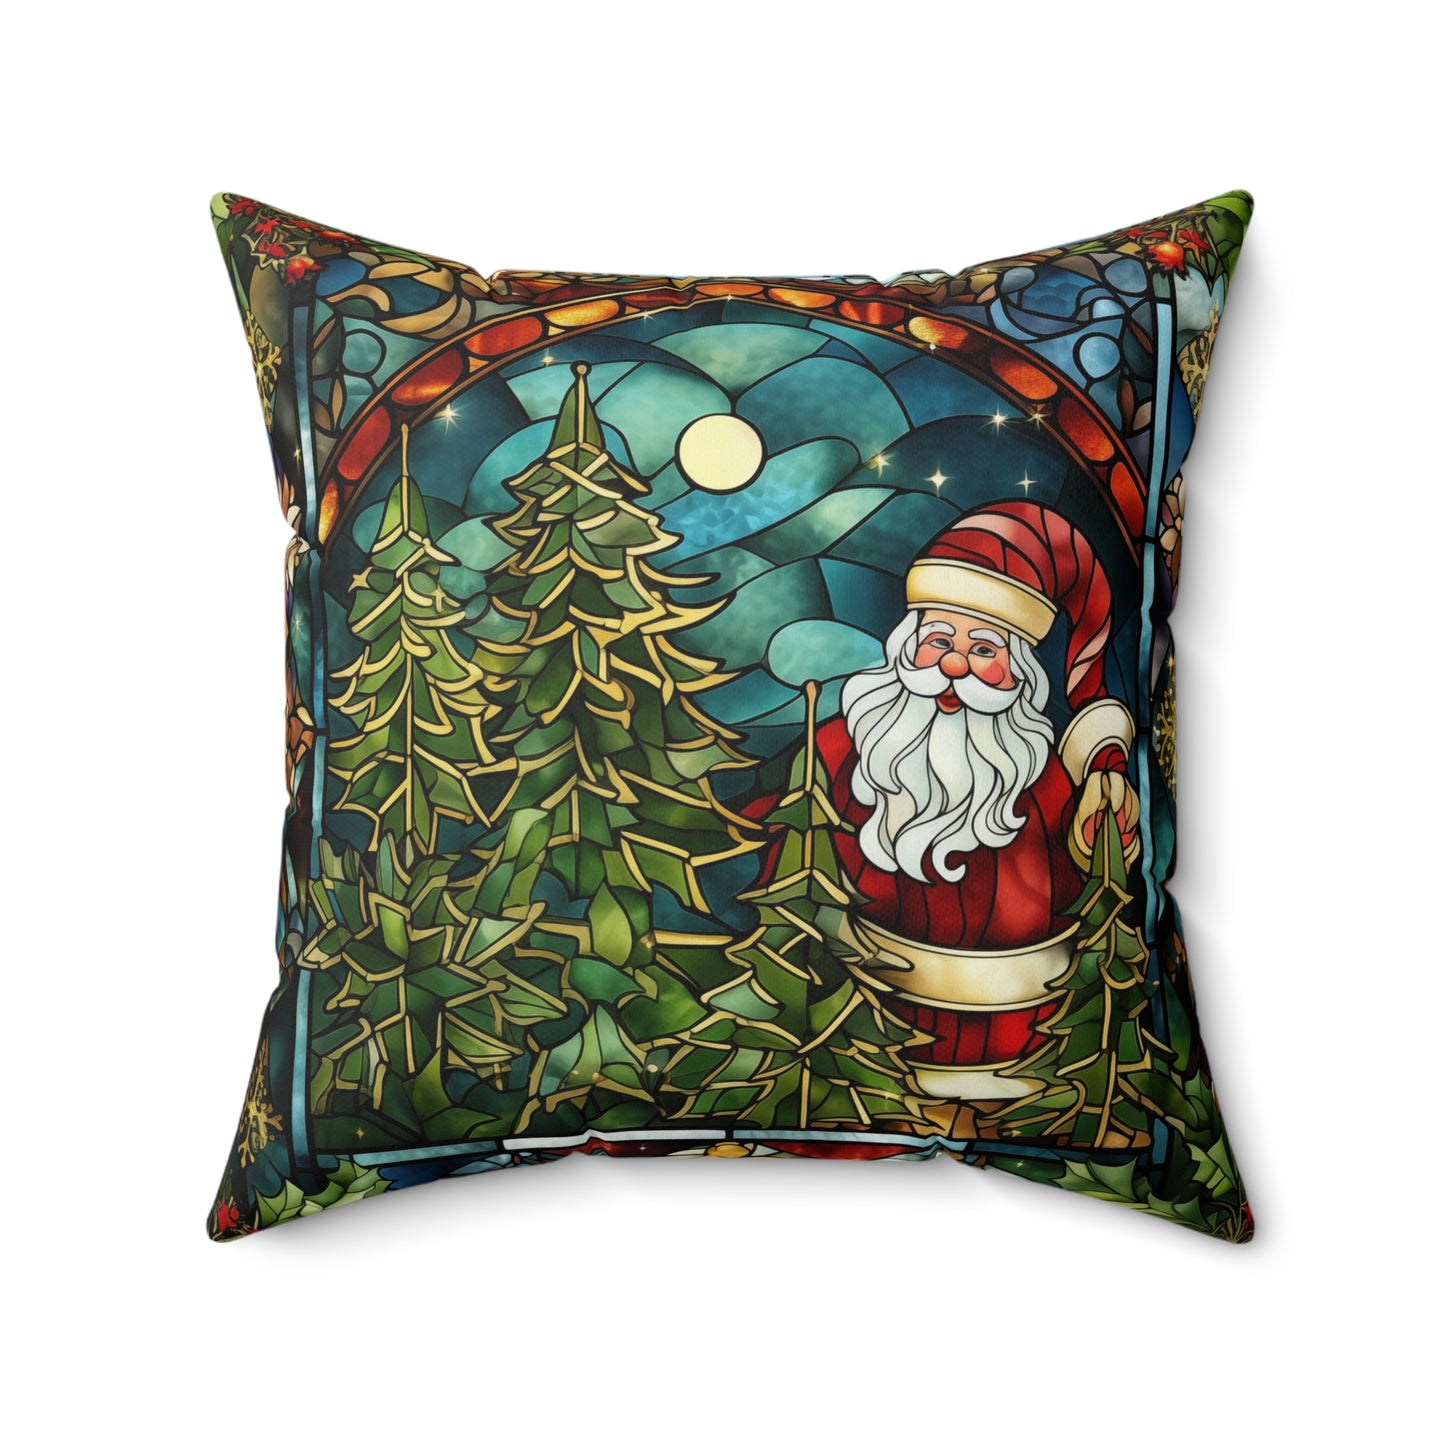 Santa Clause in the moonlight with trees | Square Pillow | Home Decor | 2 sizes available